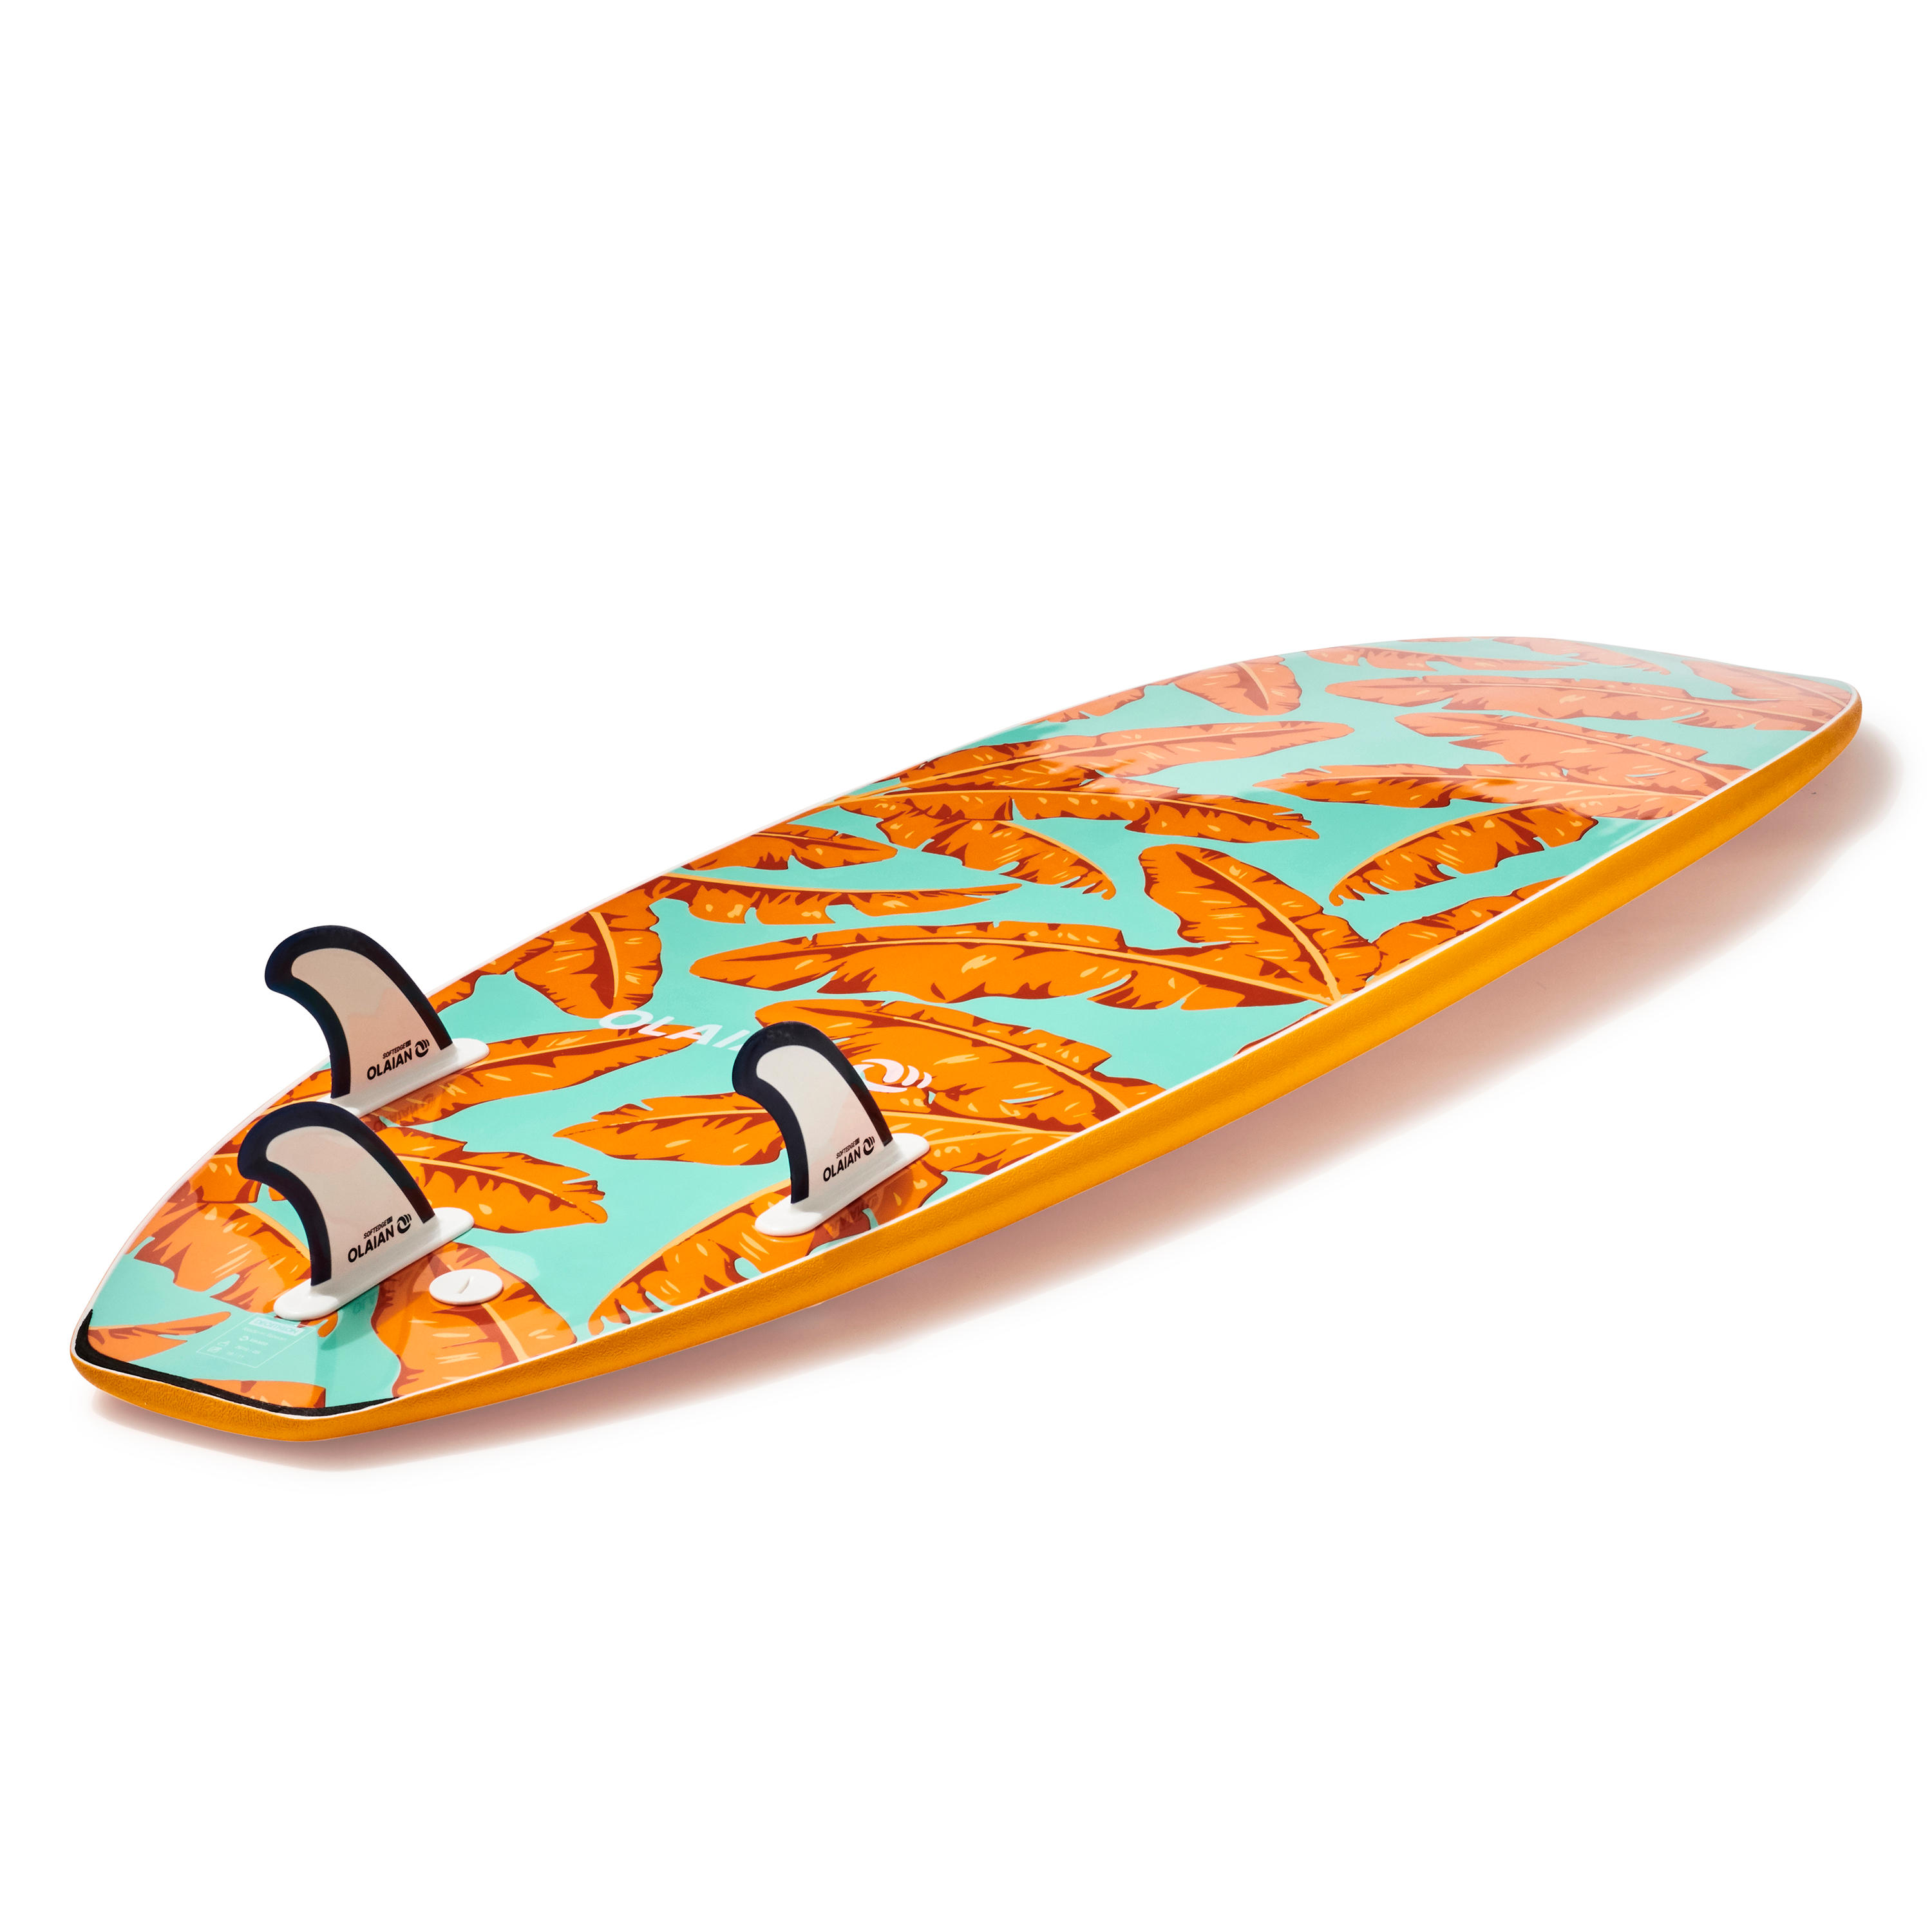 FOAM SURFBOARD 500 6'. Supplied with 1 leash and 3 fins. 6/13